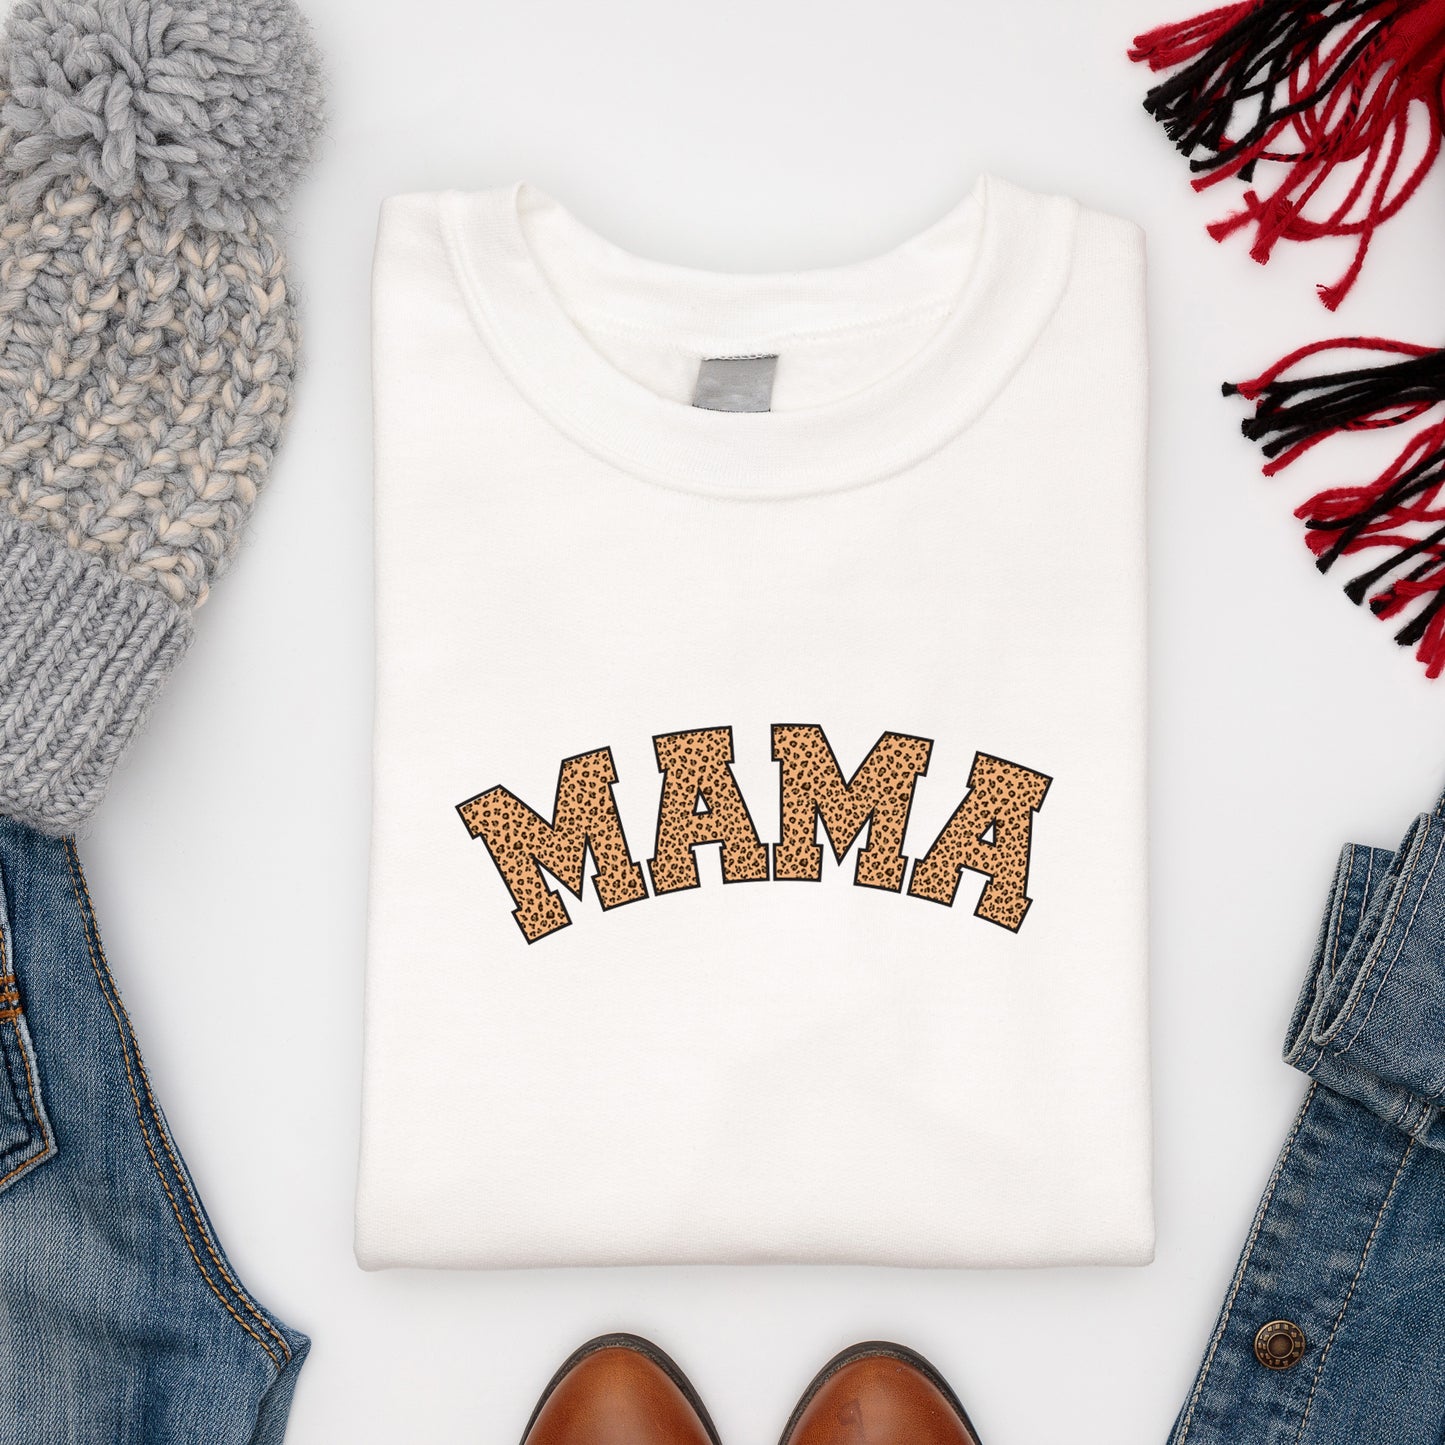 Comfy soft Mama sweatshirt paired with winter woollies